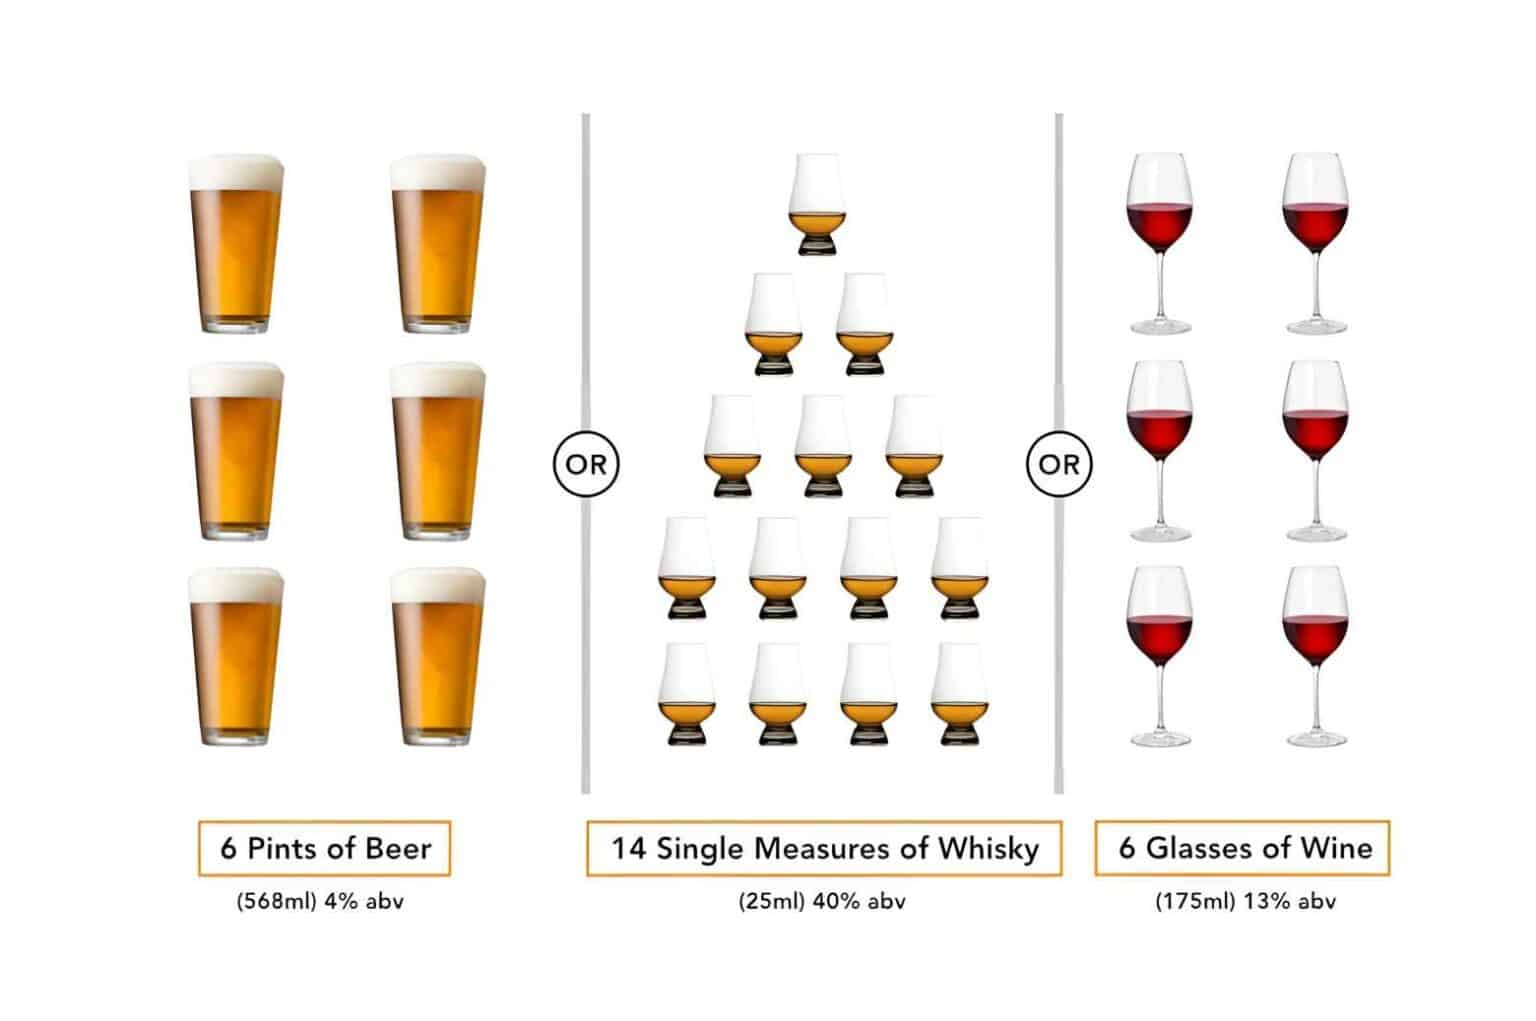 Does-Wine-Have-More-Calories-and-Alcohol-than-Beer